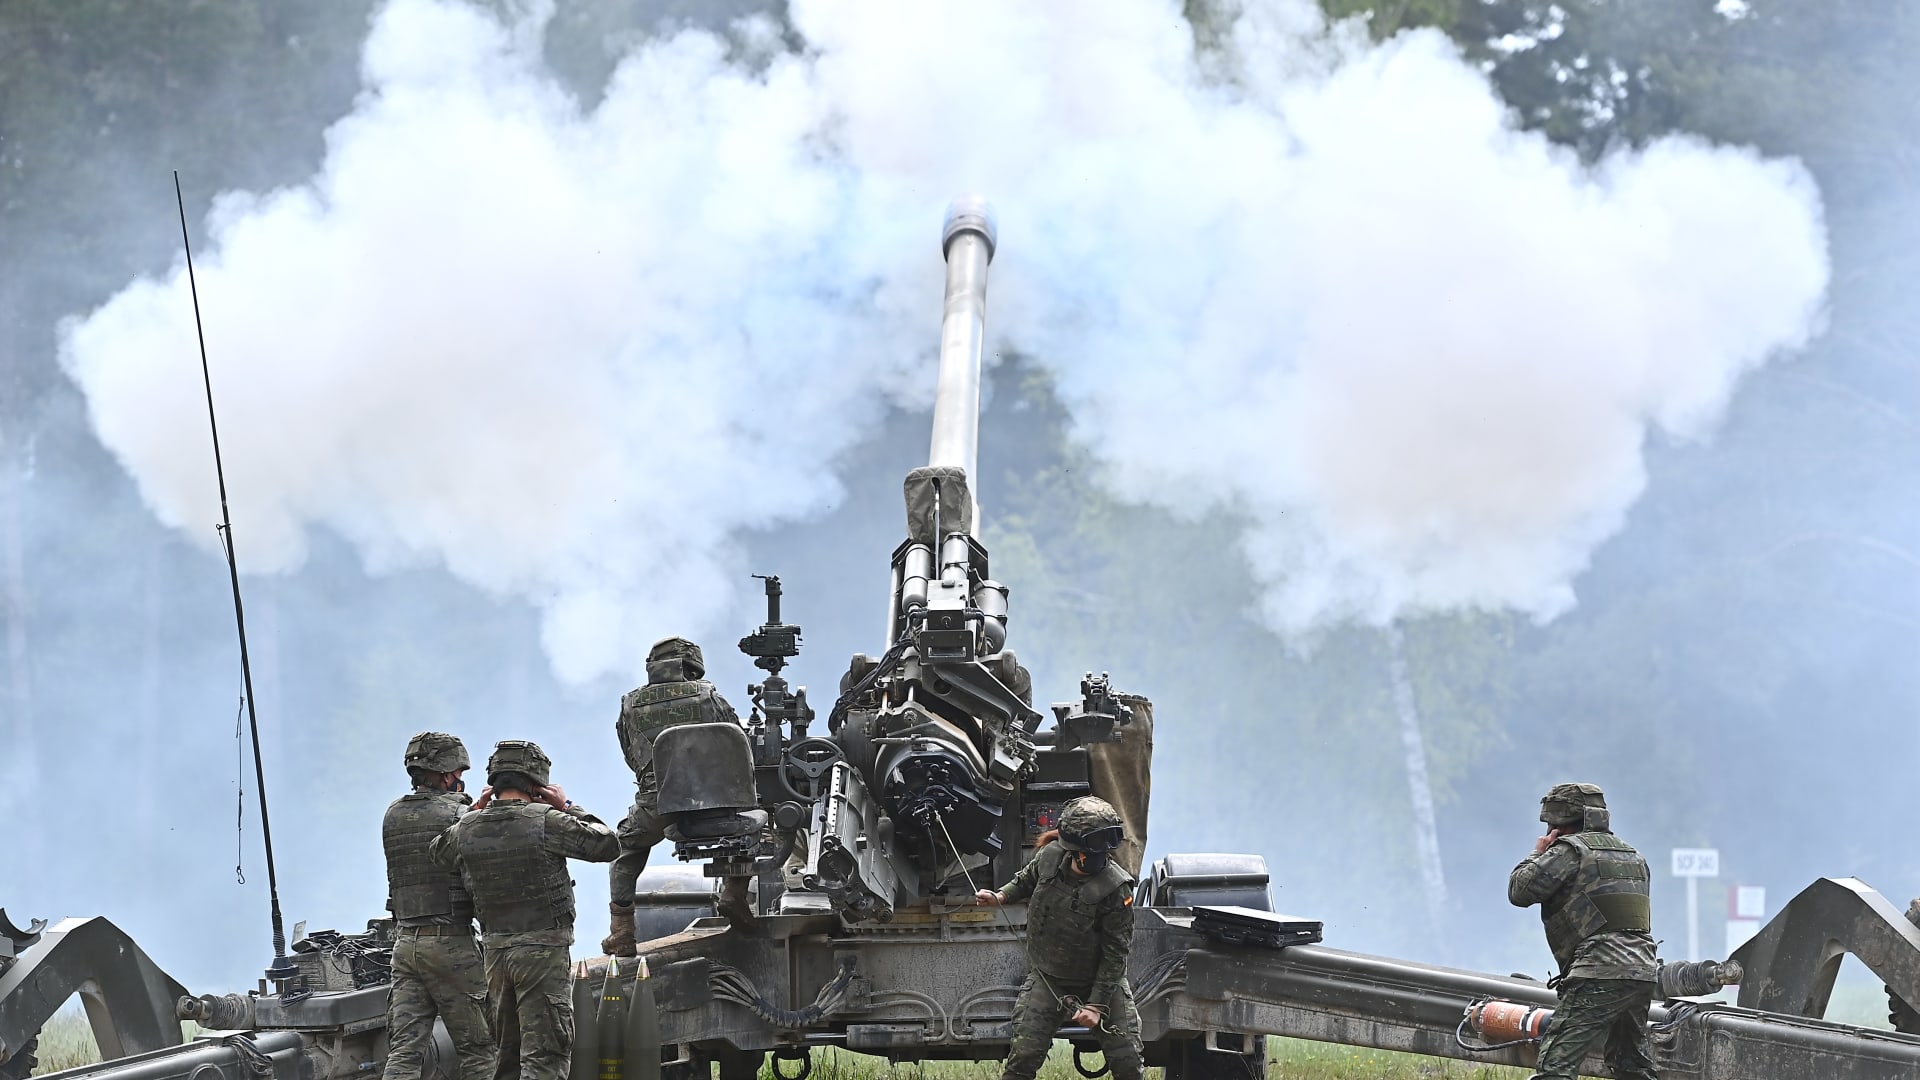 Canada has given heavy artillery to Ukrainian forces including M-777 howitzers similar to this one.